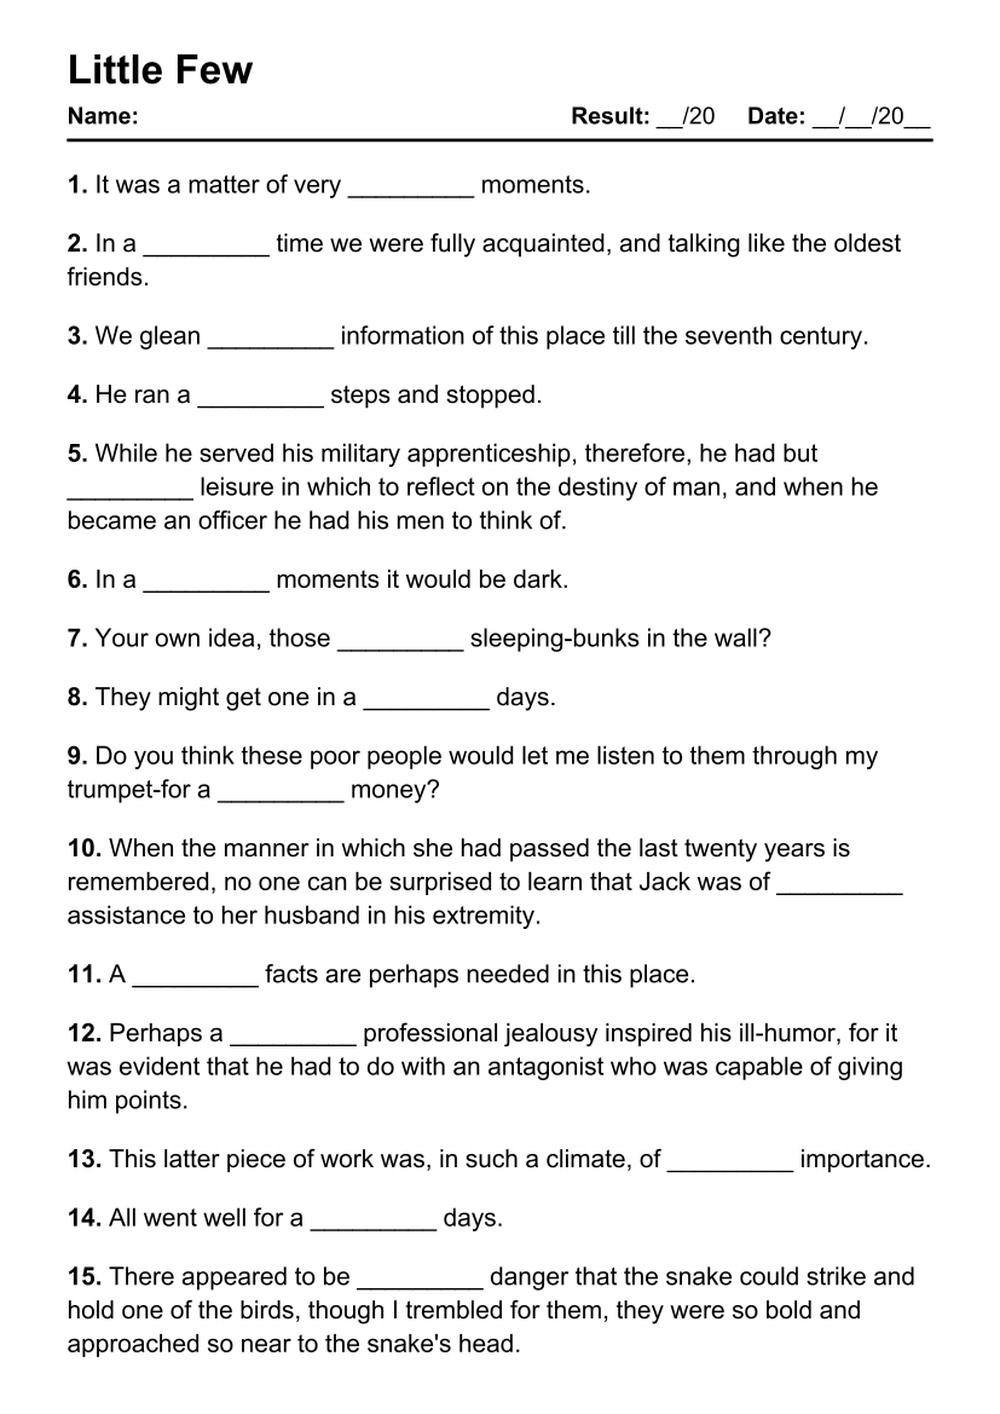 Printable Little Few Exercises - PDF Worksheet with Answers - Test 37